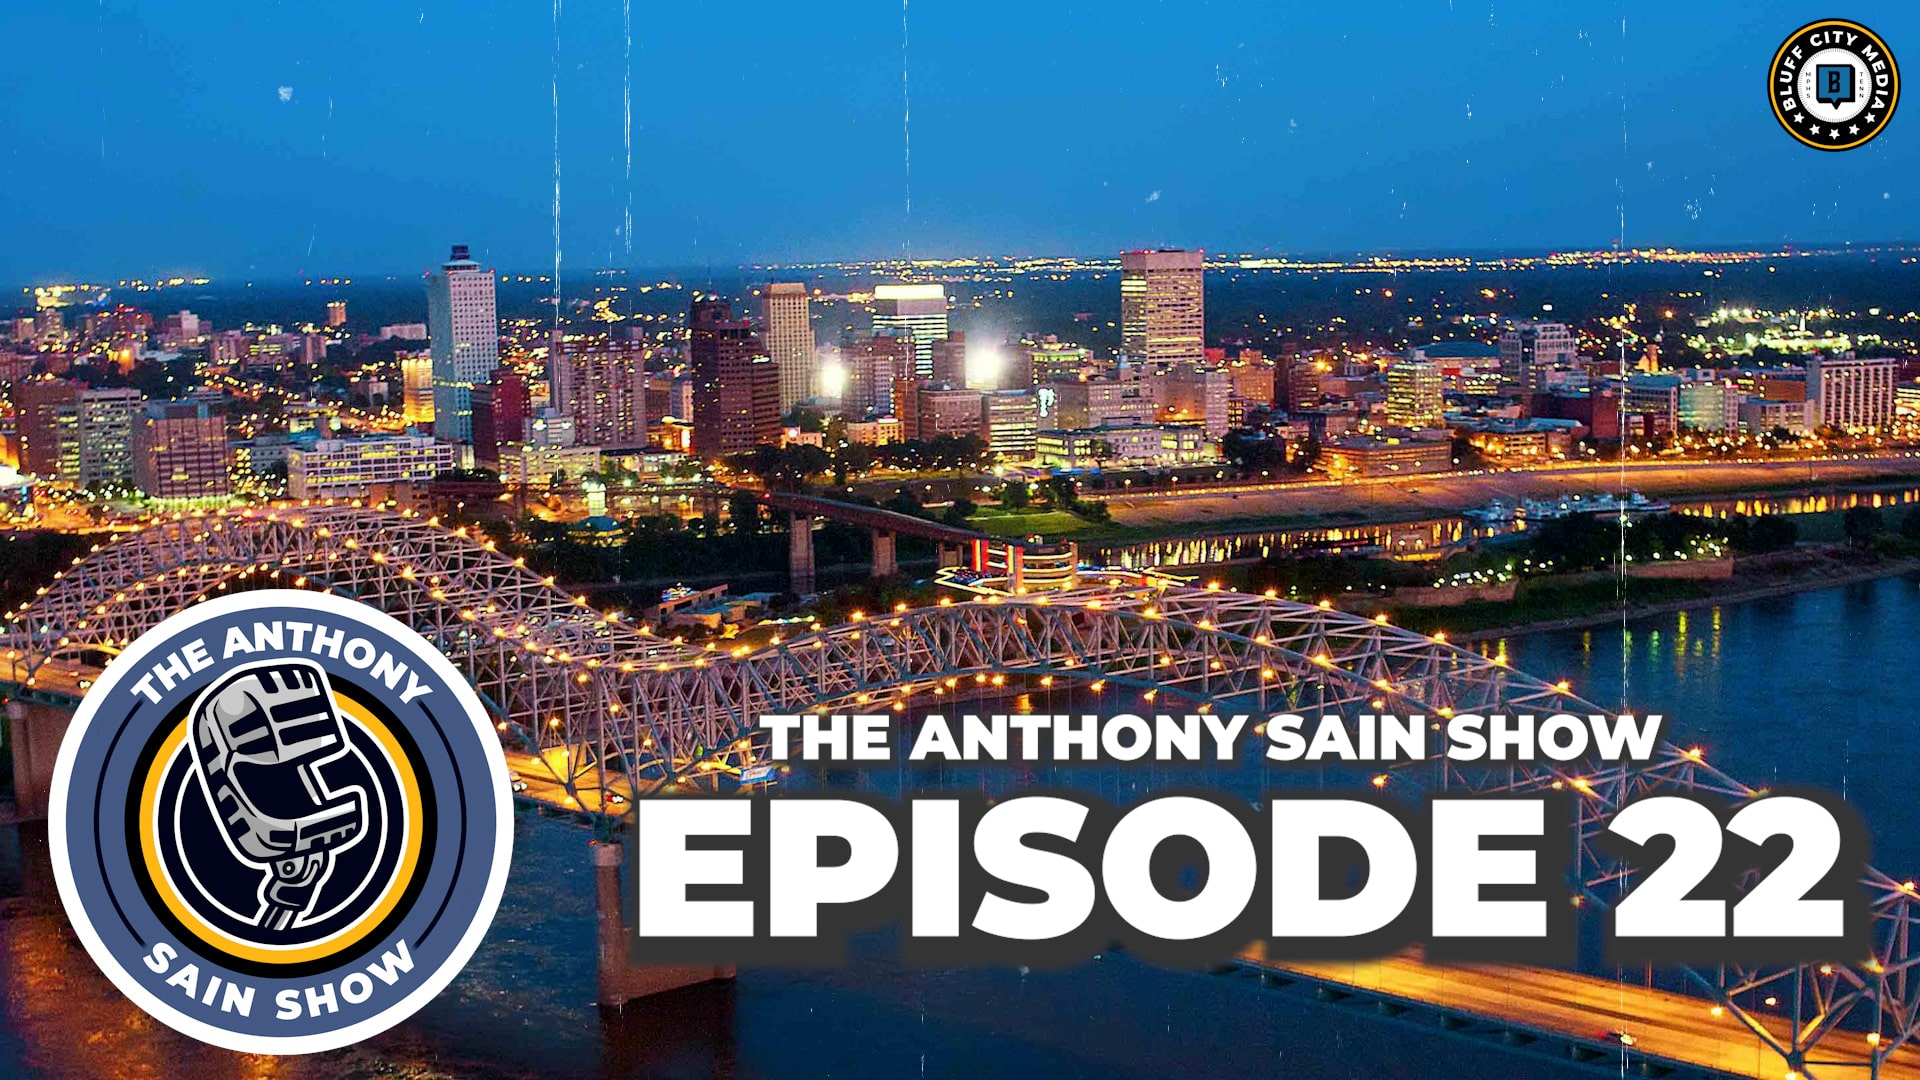 Featured image for “The Anthony Sain Show Ep 22: Mayoral Candidate Paul Young In Studio, Michael Oher Part 2”